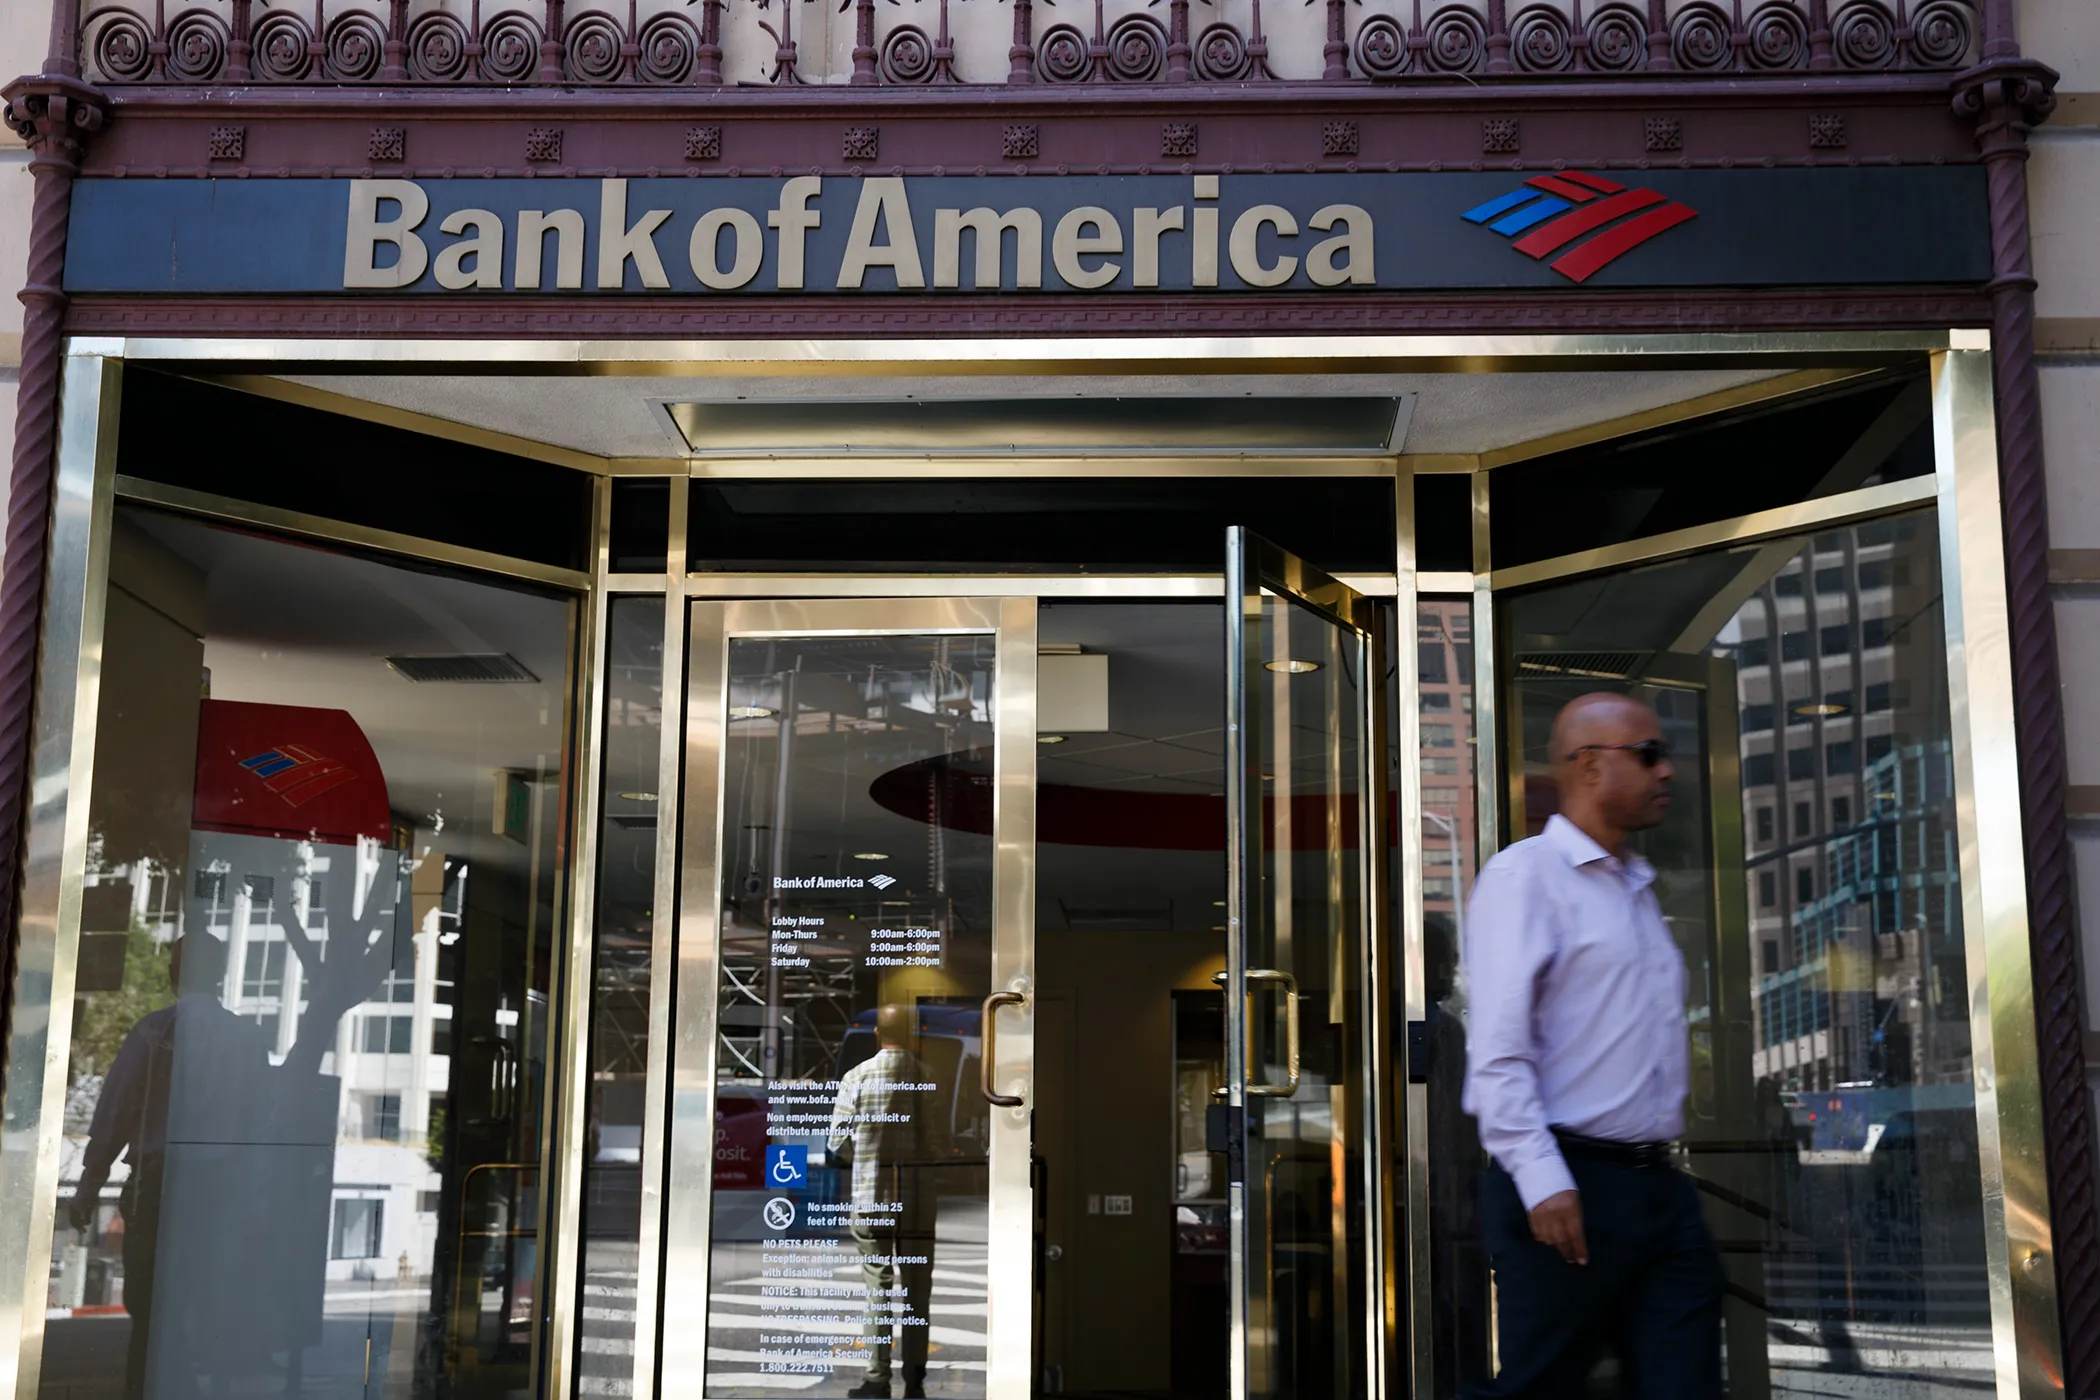 Millennials Are Rejecting Big Banks in Favor of Local Banks